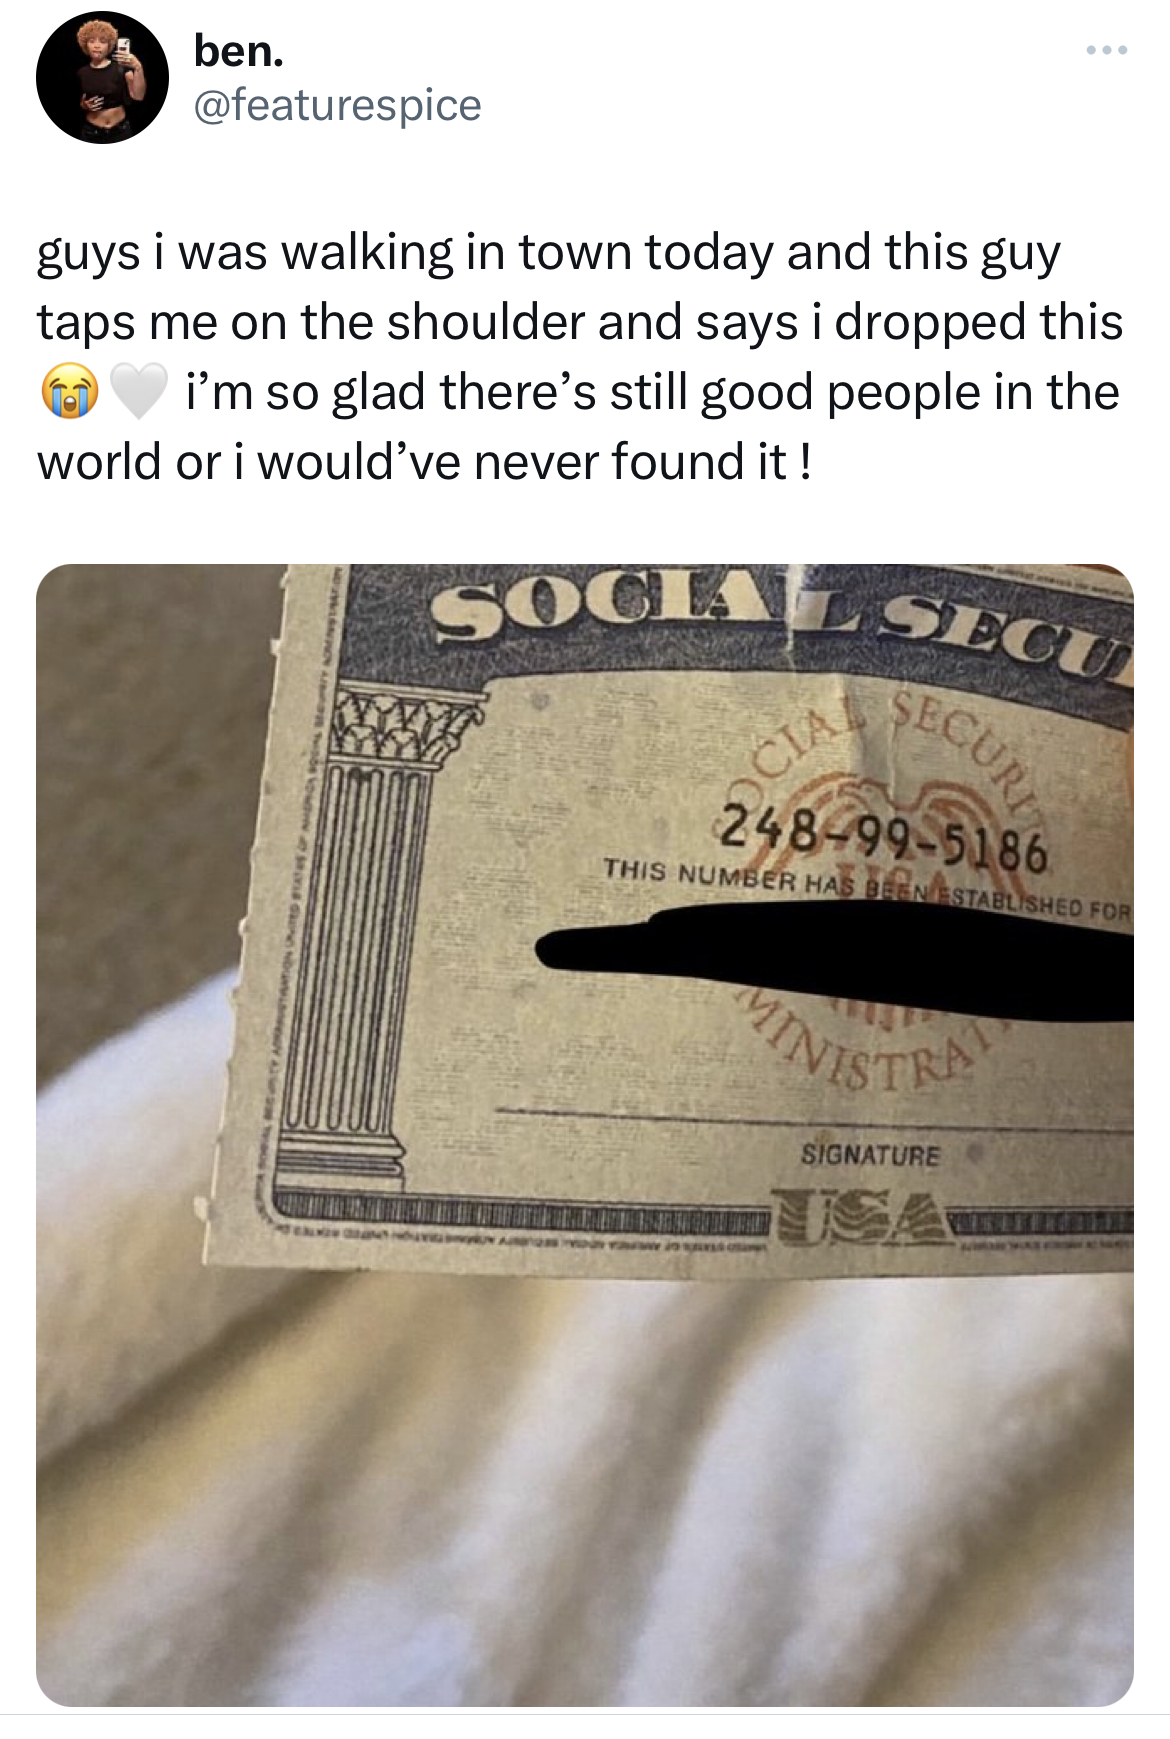 funny tweets - 9 ben. guys i was walking in town today and this guy taps me on the shoulder and says i dropped this i'm so glad there's still good people in the world or i would've never found it ! Sock Cia Secu 248995186 This Number Has Brastarmed For Si